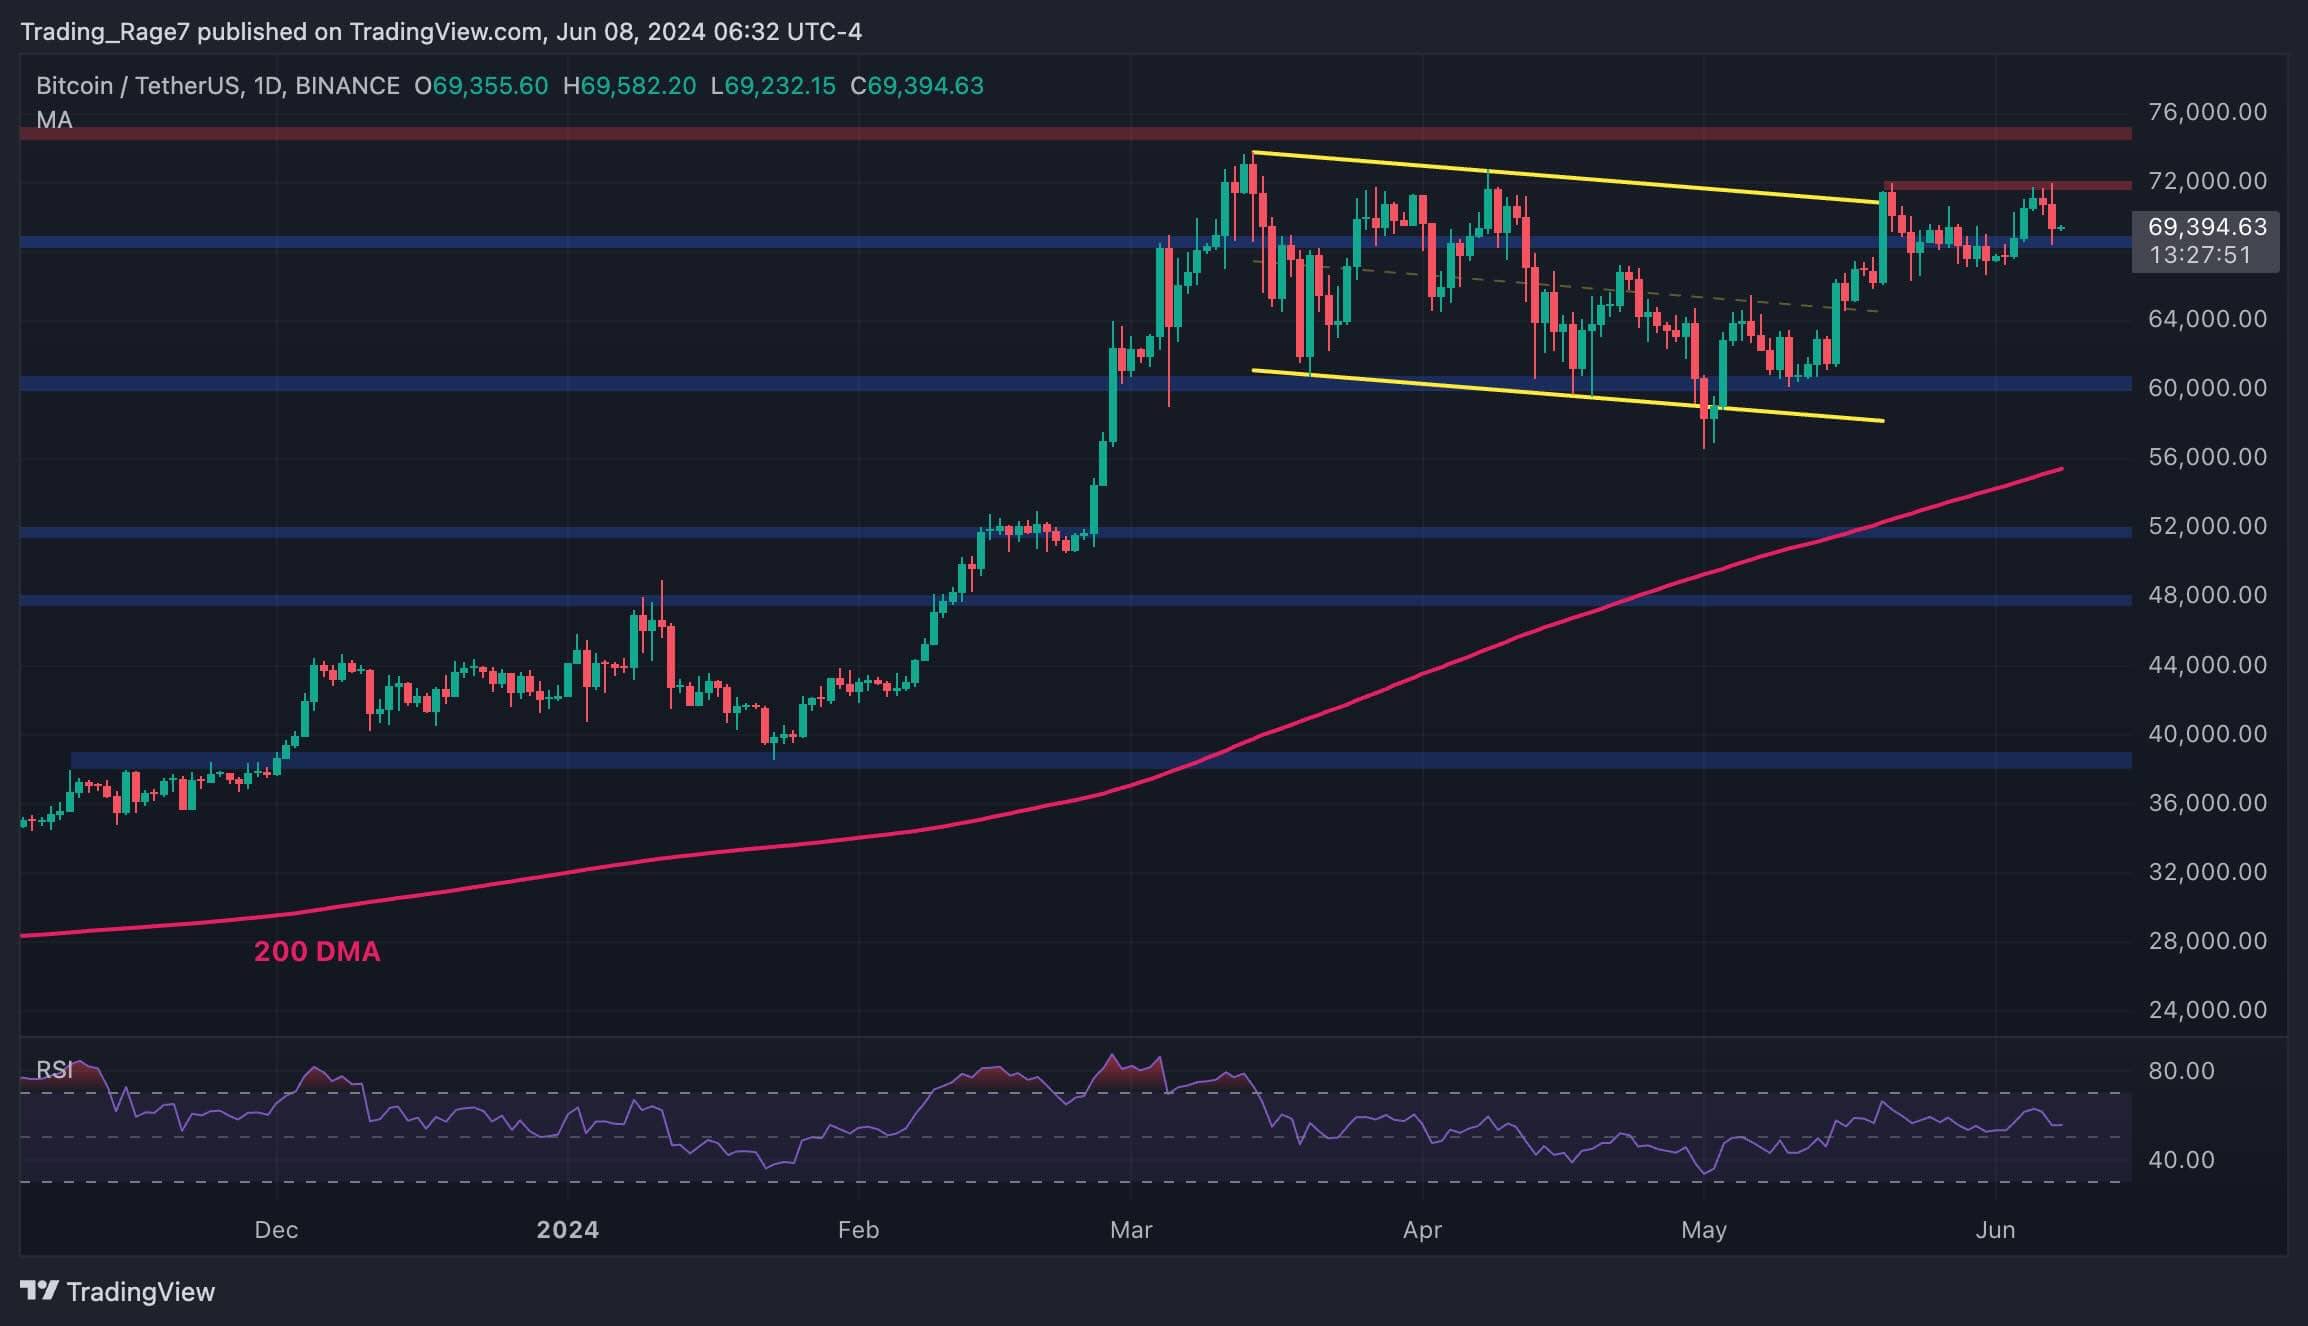 Why-did-the-bitcoin-price-crash-below-$70k-and-is-the-bleeding-over?-(bitcoin-price-analysis)